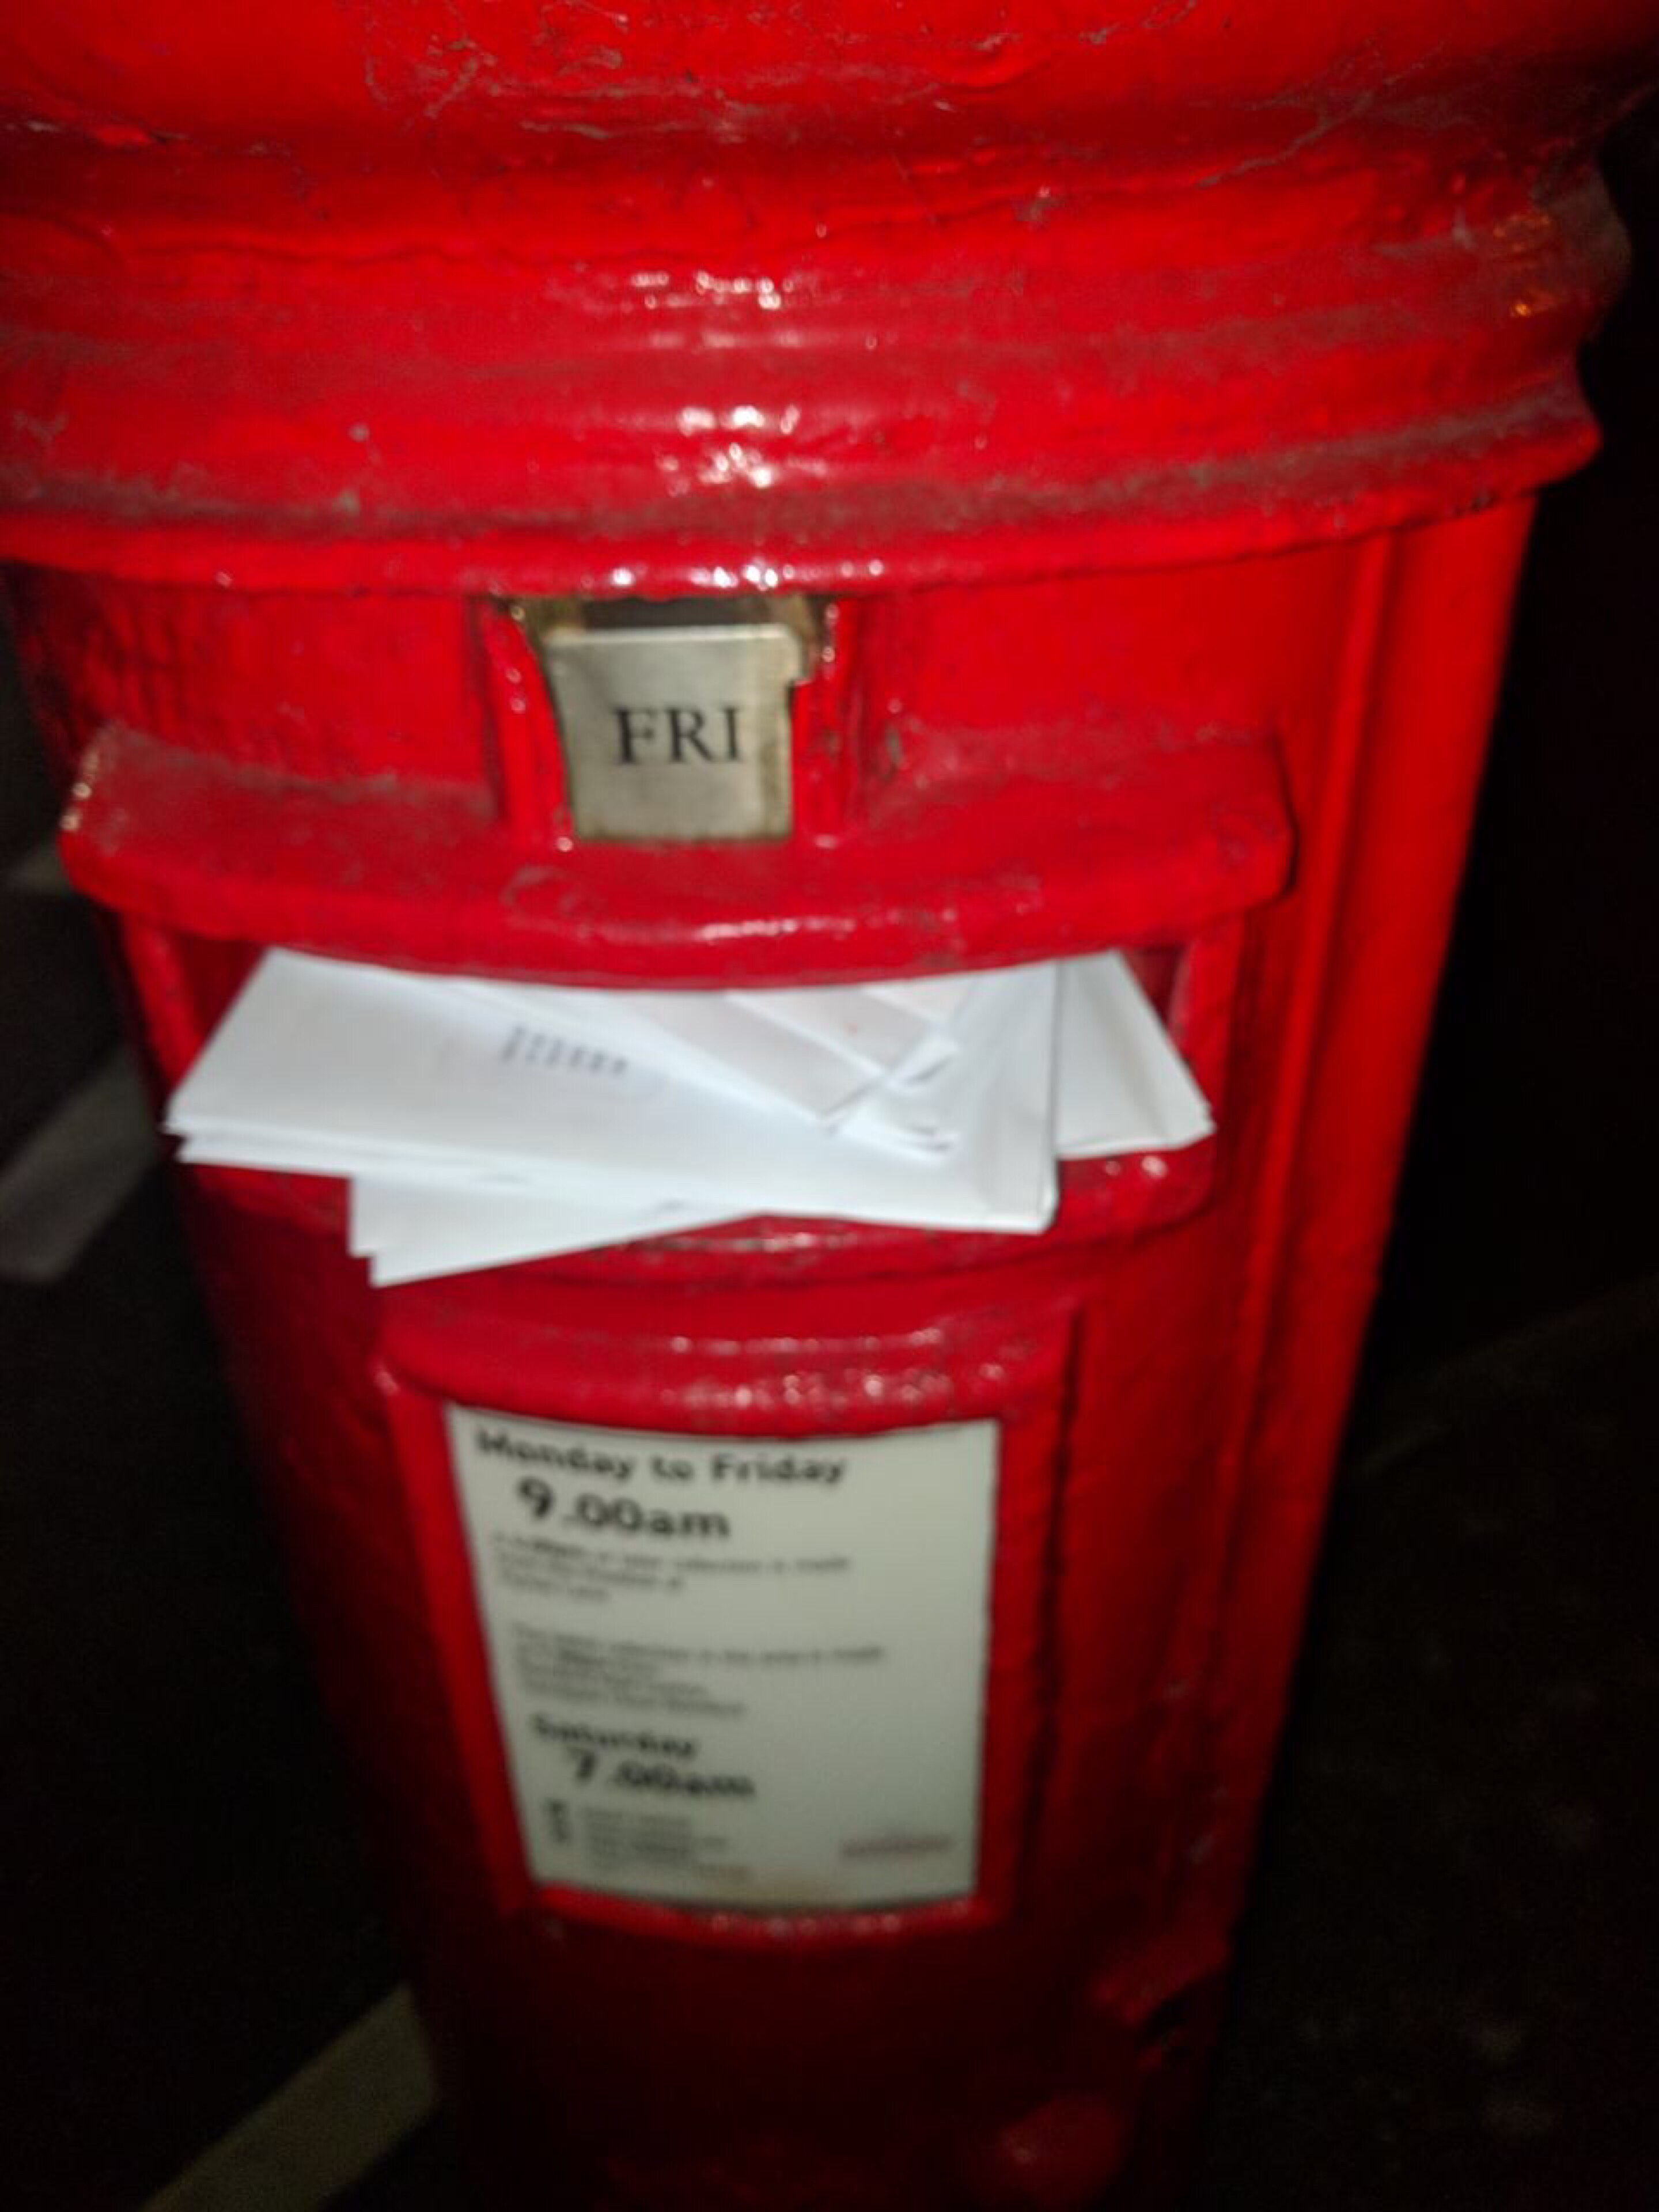 300 invites in a Royal Mail post box.